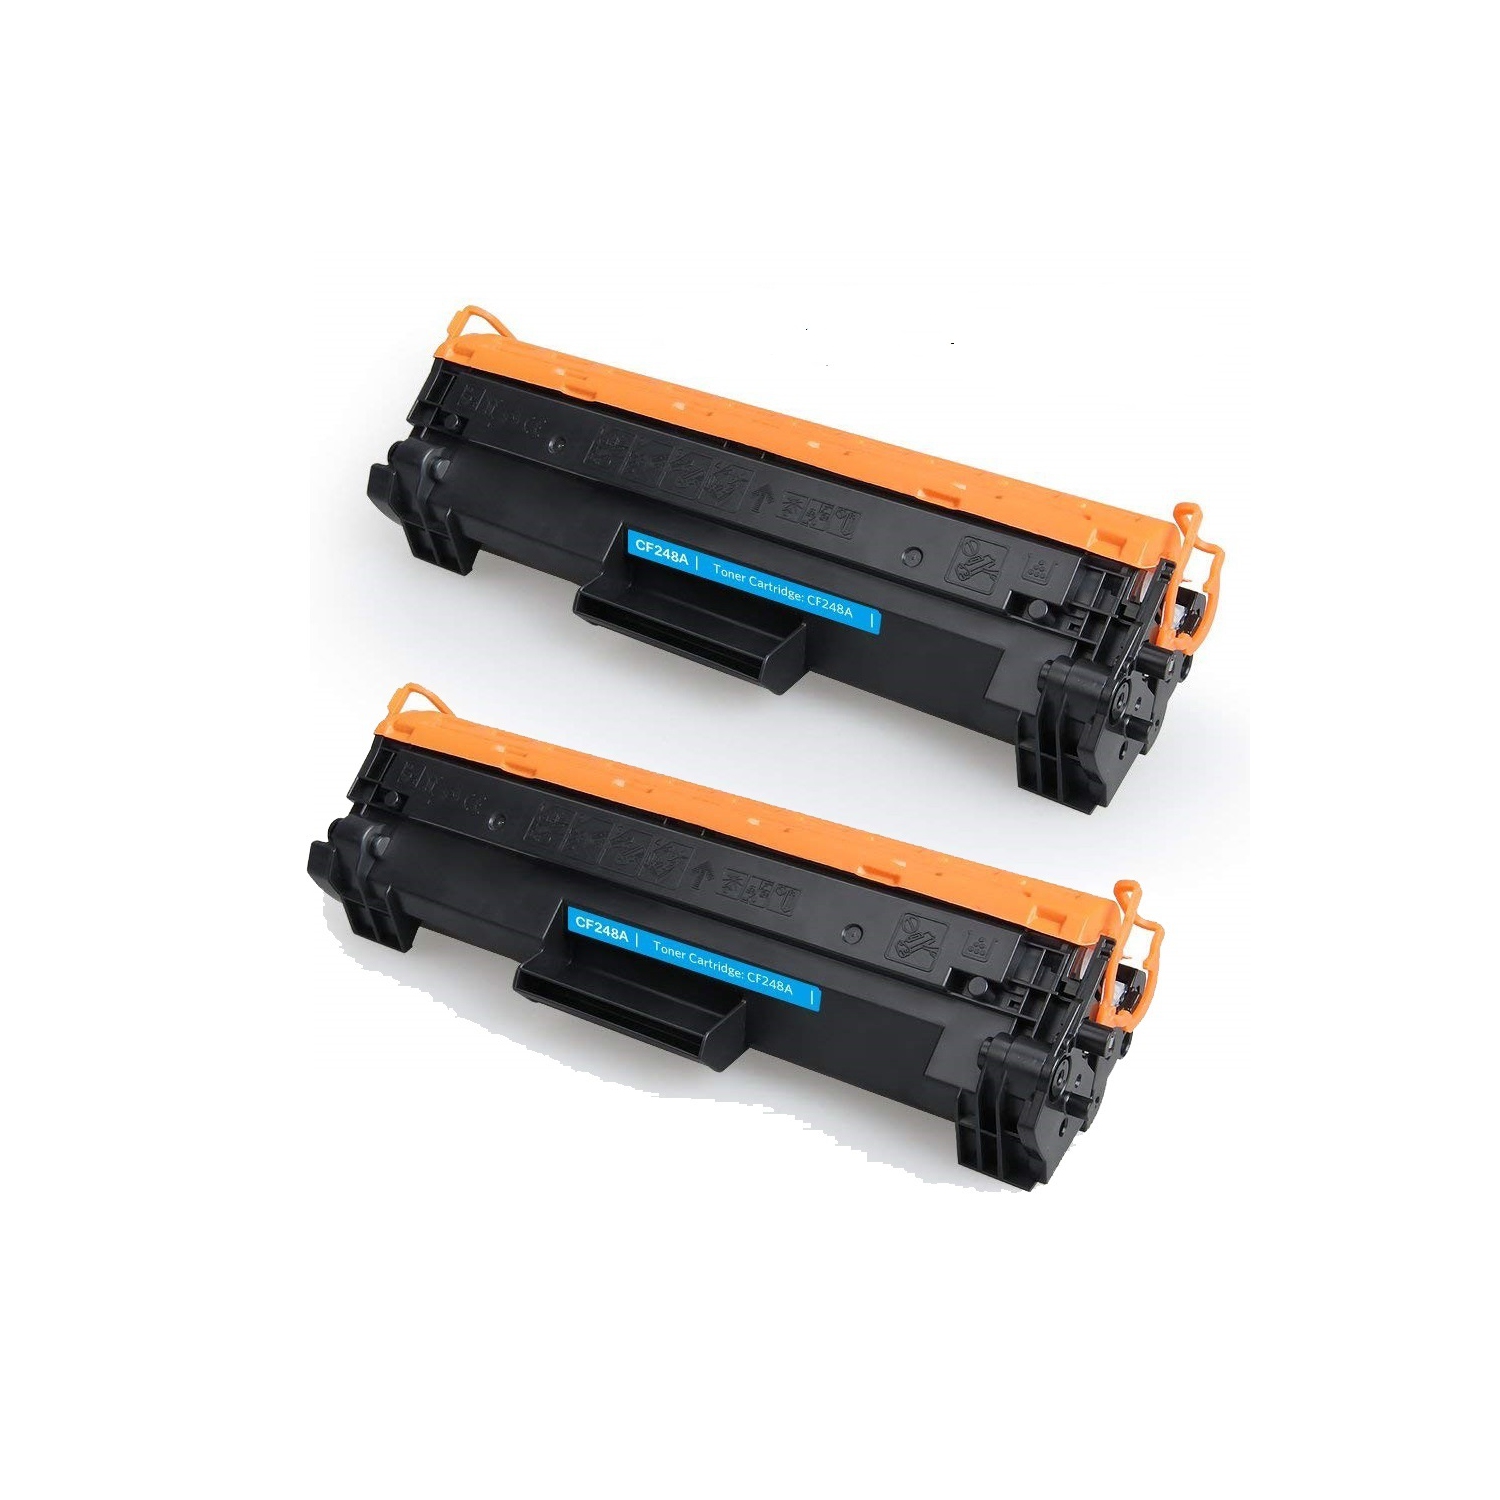 Max Saving - 2 Pack Compatible with CF248A Toner Cartridge for HP 48A printer Laserjet Pro M15a, M15,MFP M28w MFP M28a LaserJet Pro MFP M29,Pro M14-M17